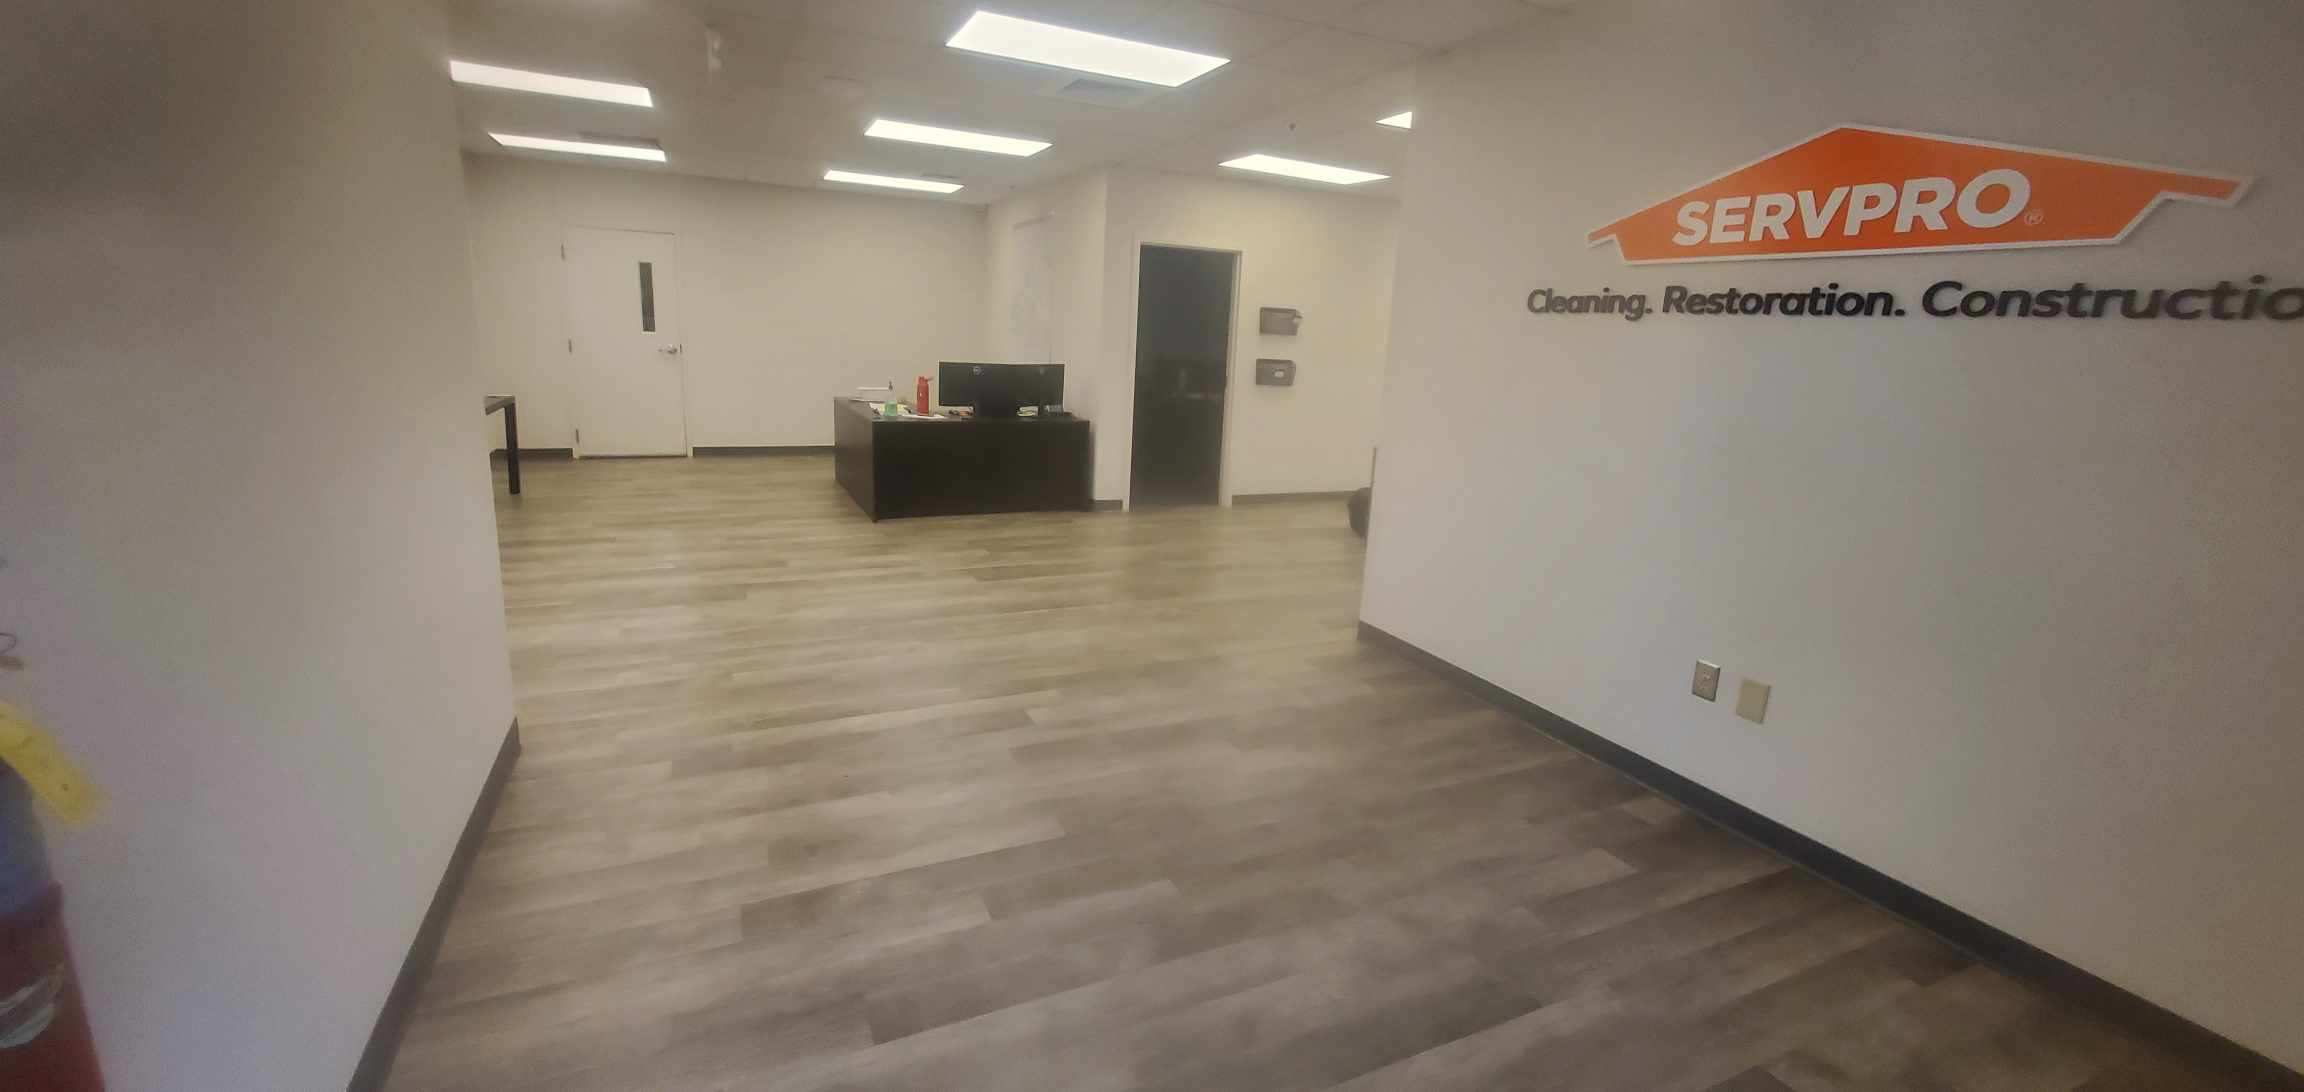 Inside of reception are SERVPRO of North Lilburn and North Lawrenceville